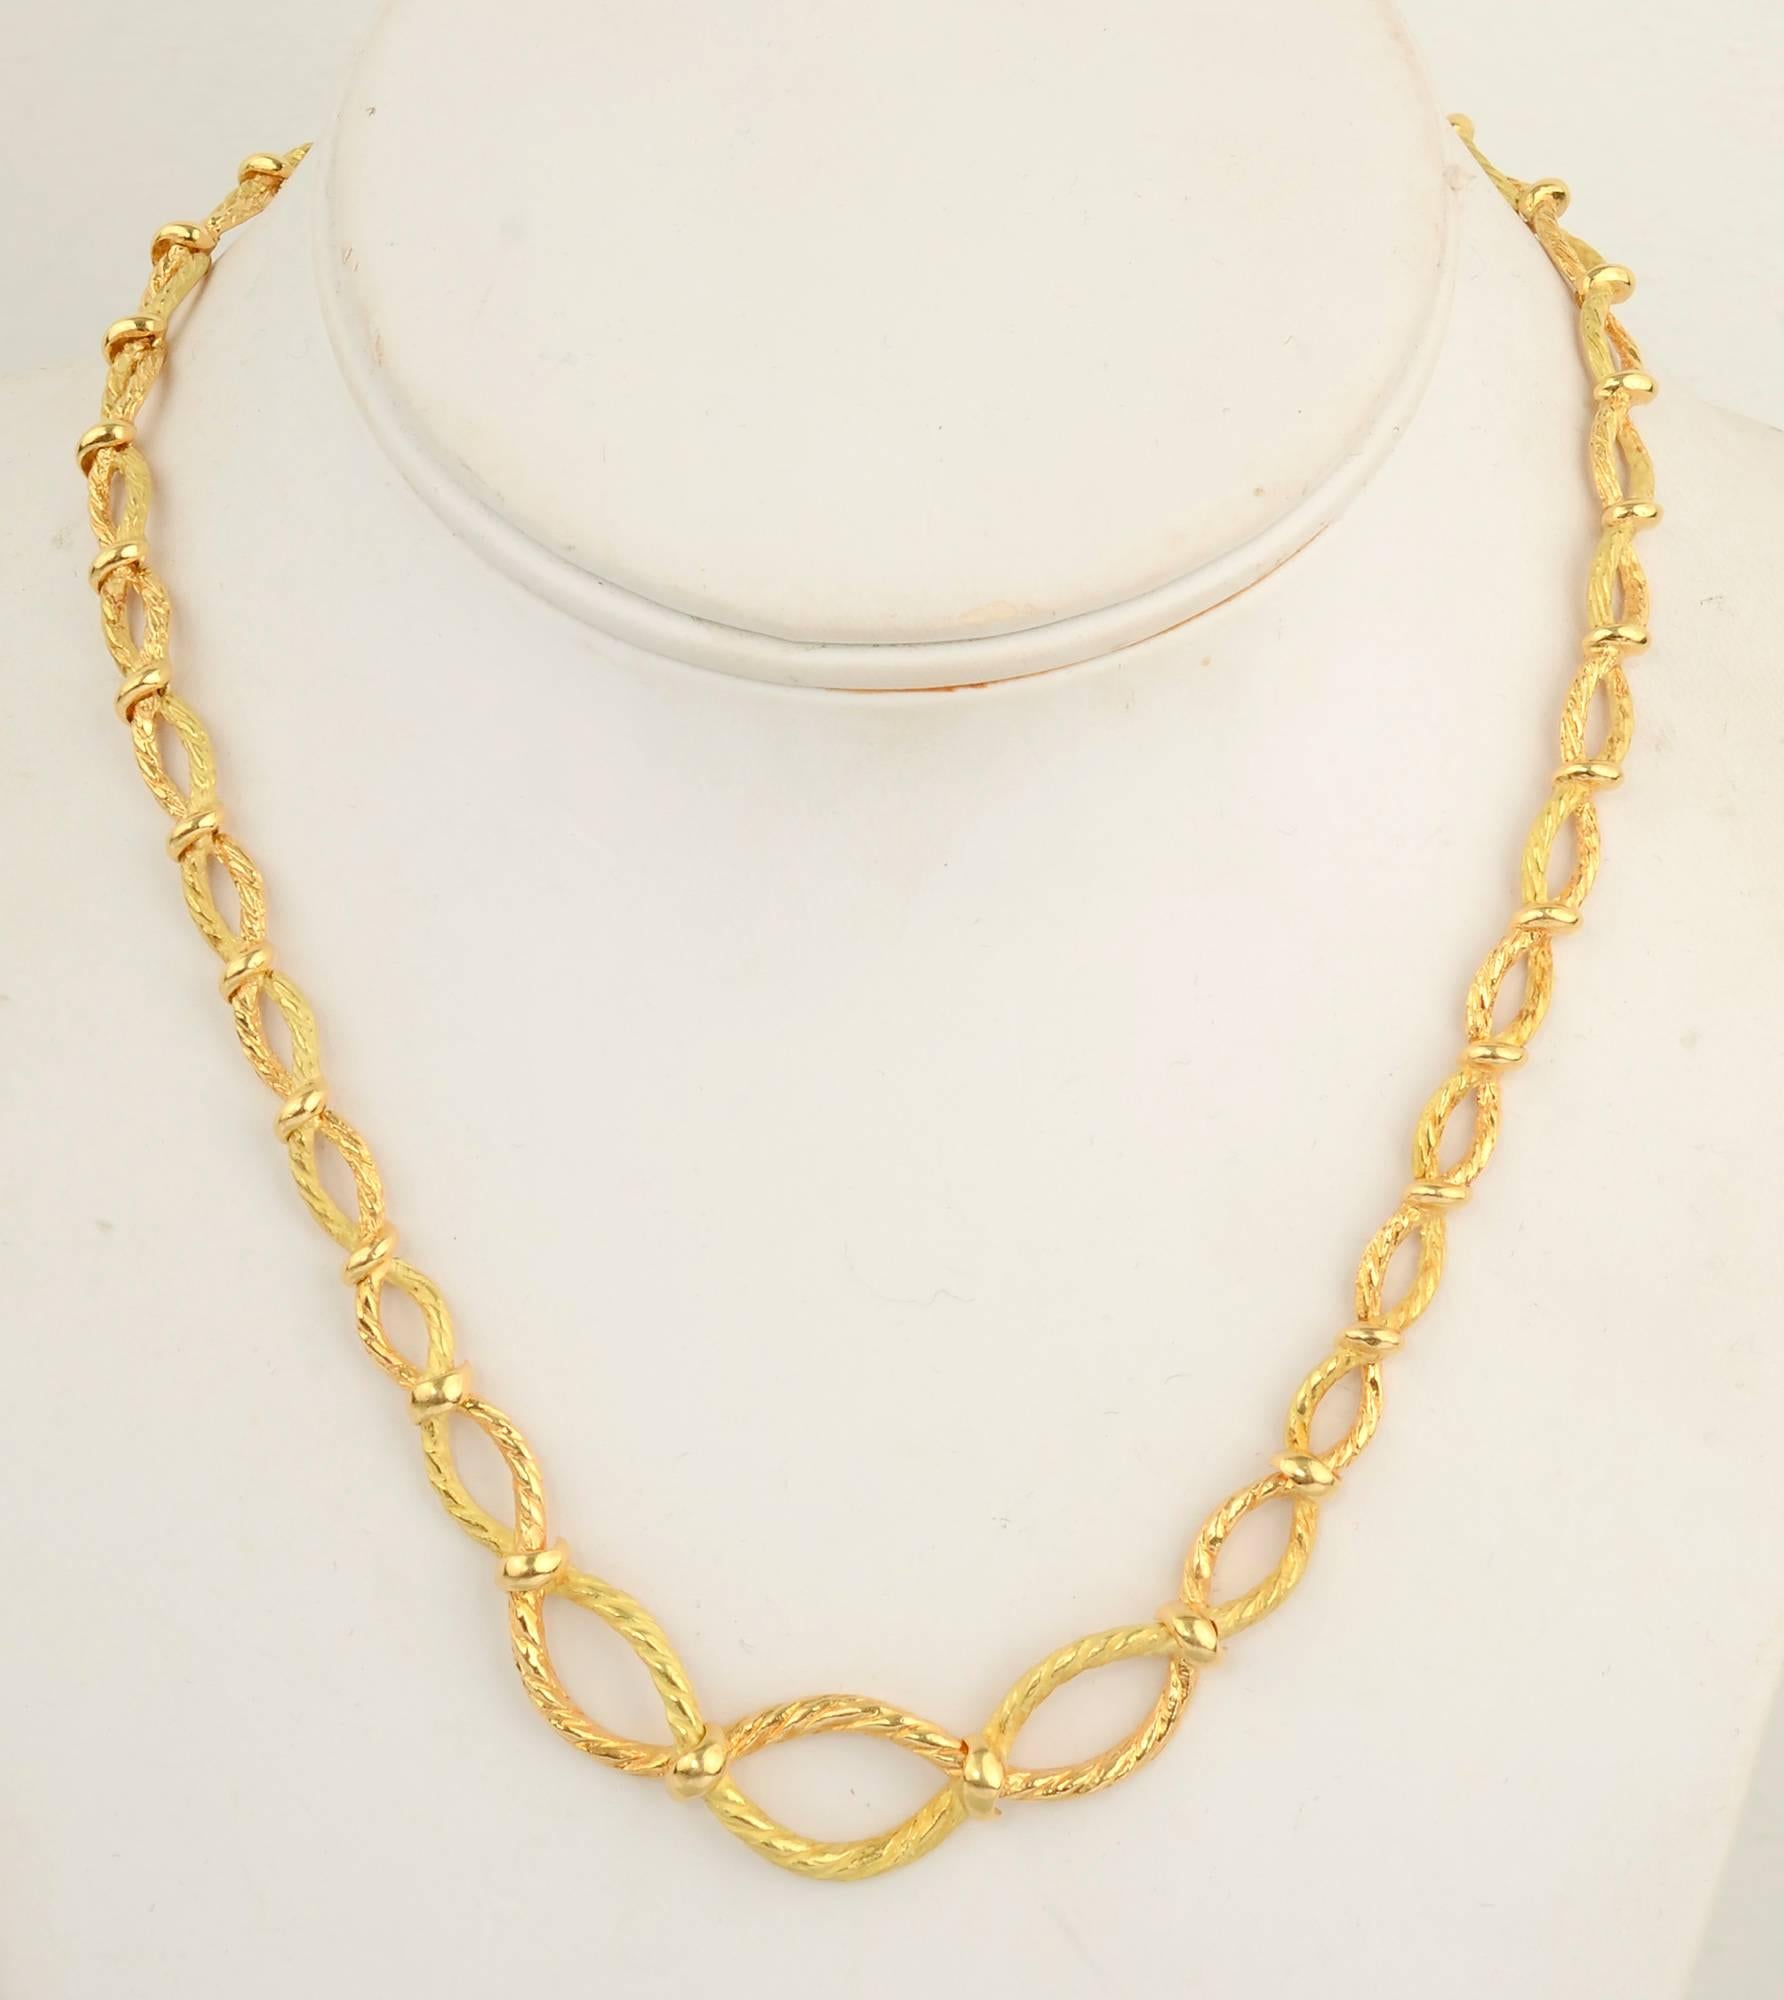 Graduated oval links make a beautiful design in this 18 karat gold necklace by Tiffany; made in France. The links are made of twisted gold with smooth intersections. The center links are half an inch wide and narrow to 1/4 inch at the clasp. Length